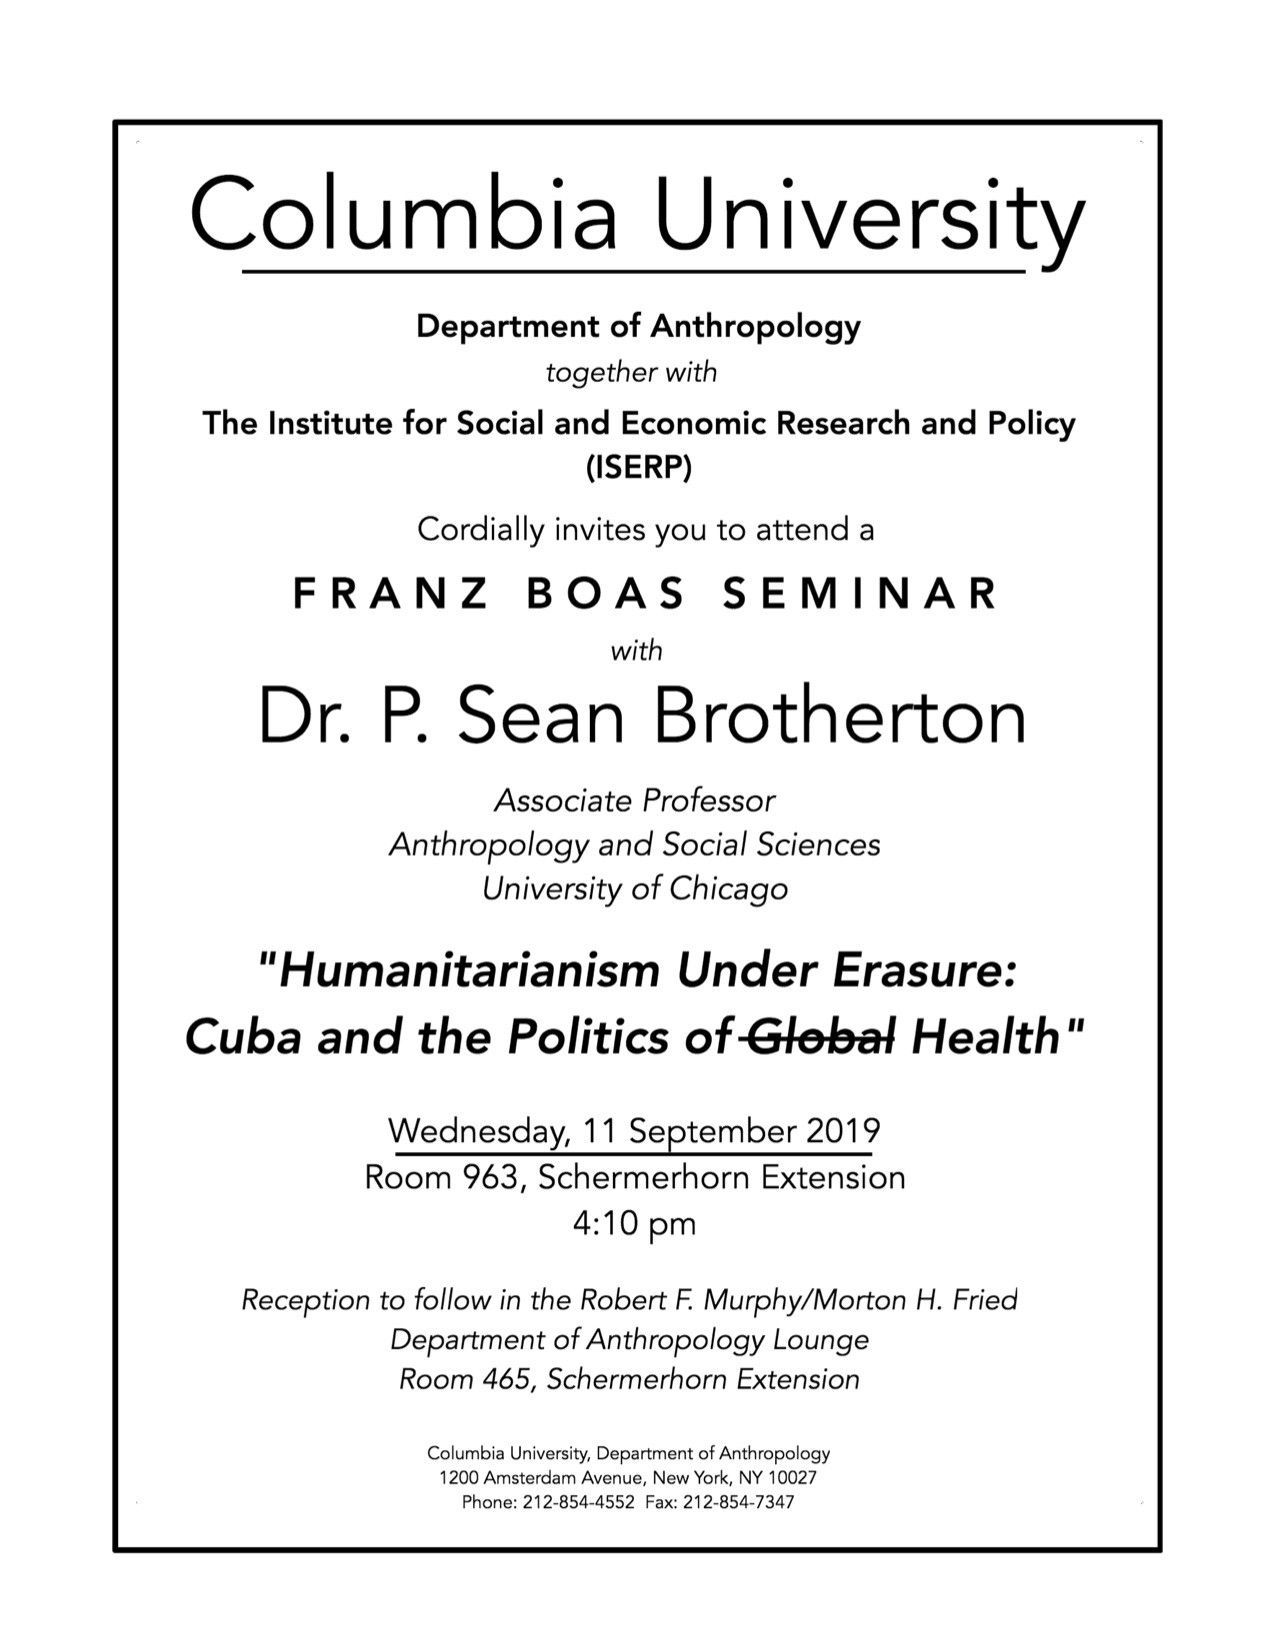 Event poster for Seminar